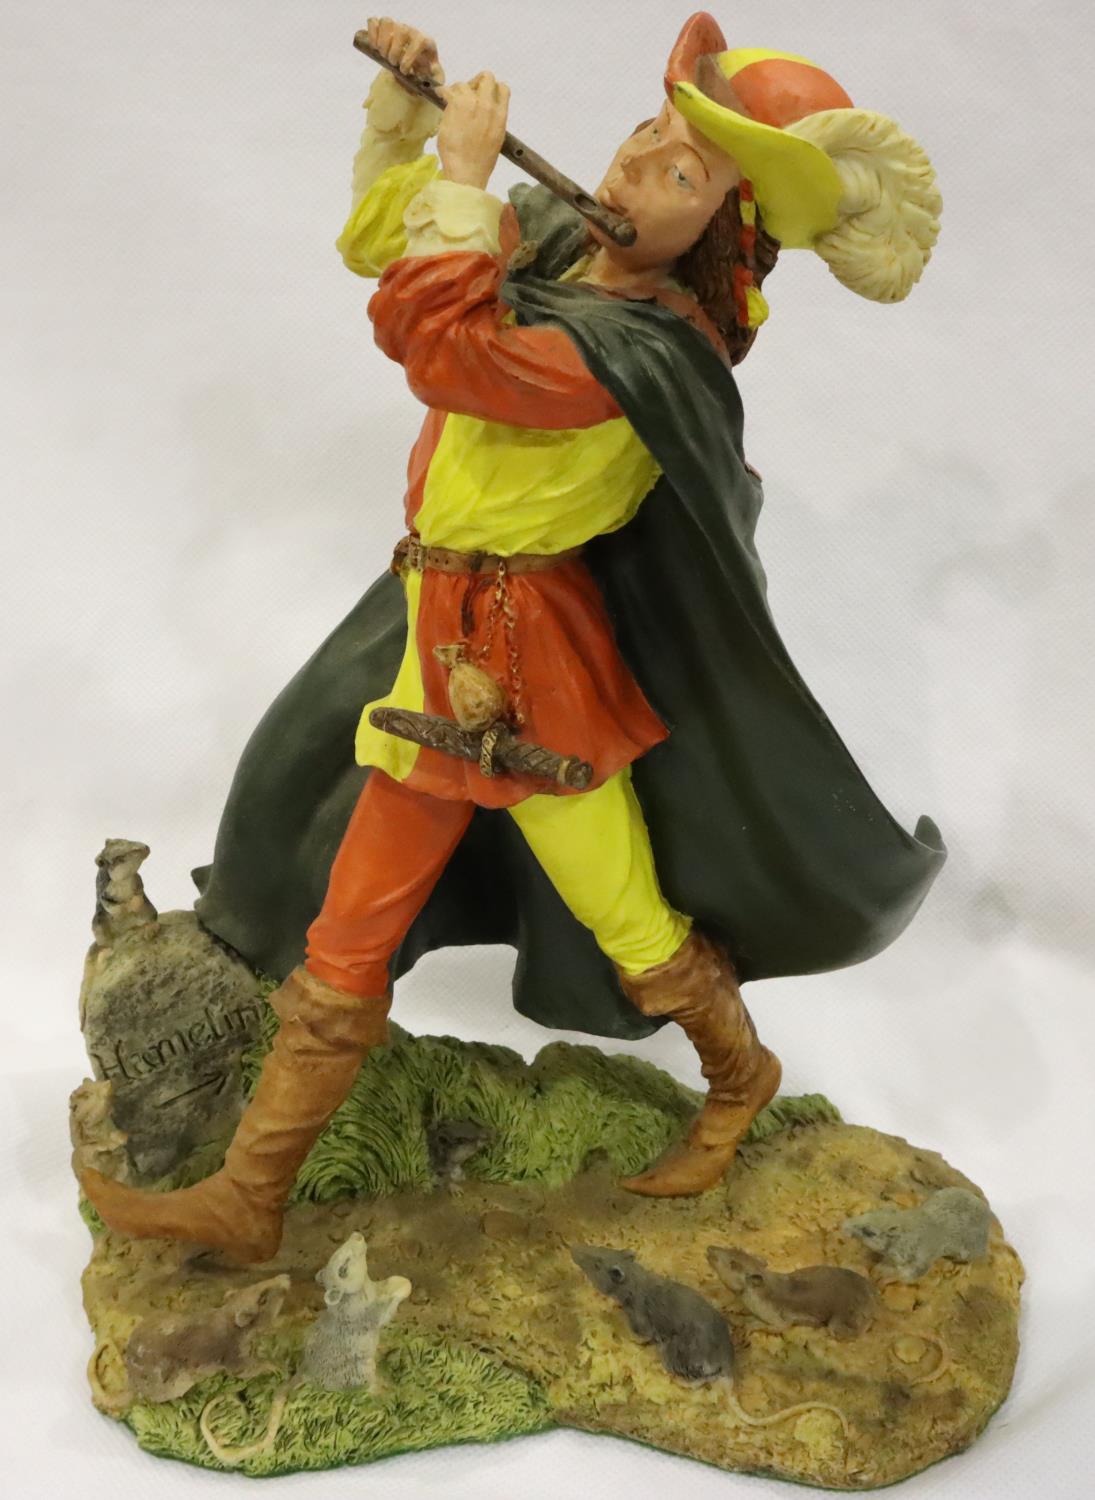 Royal Doulton resin figurines including Long John Silver and The Pied Piper, Long John Silver - Image 2 of 7